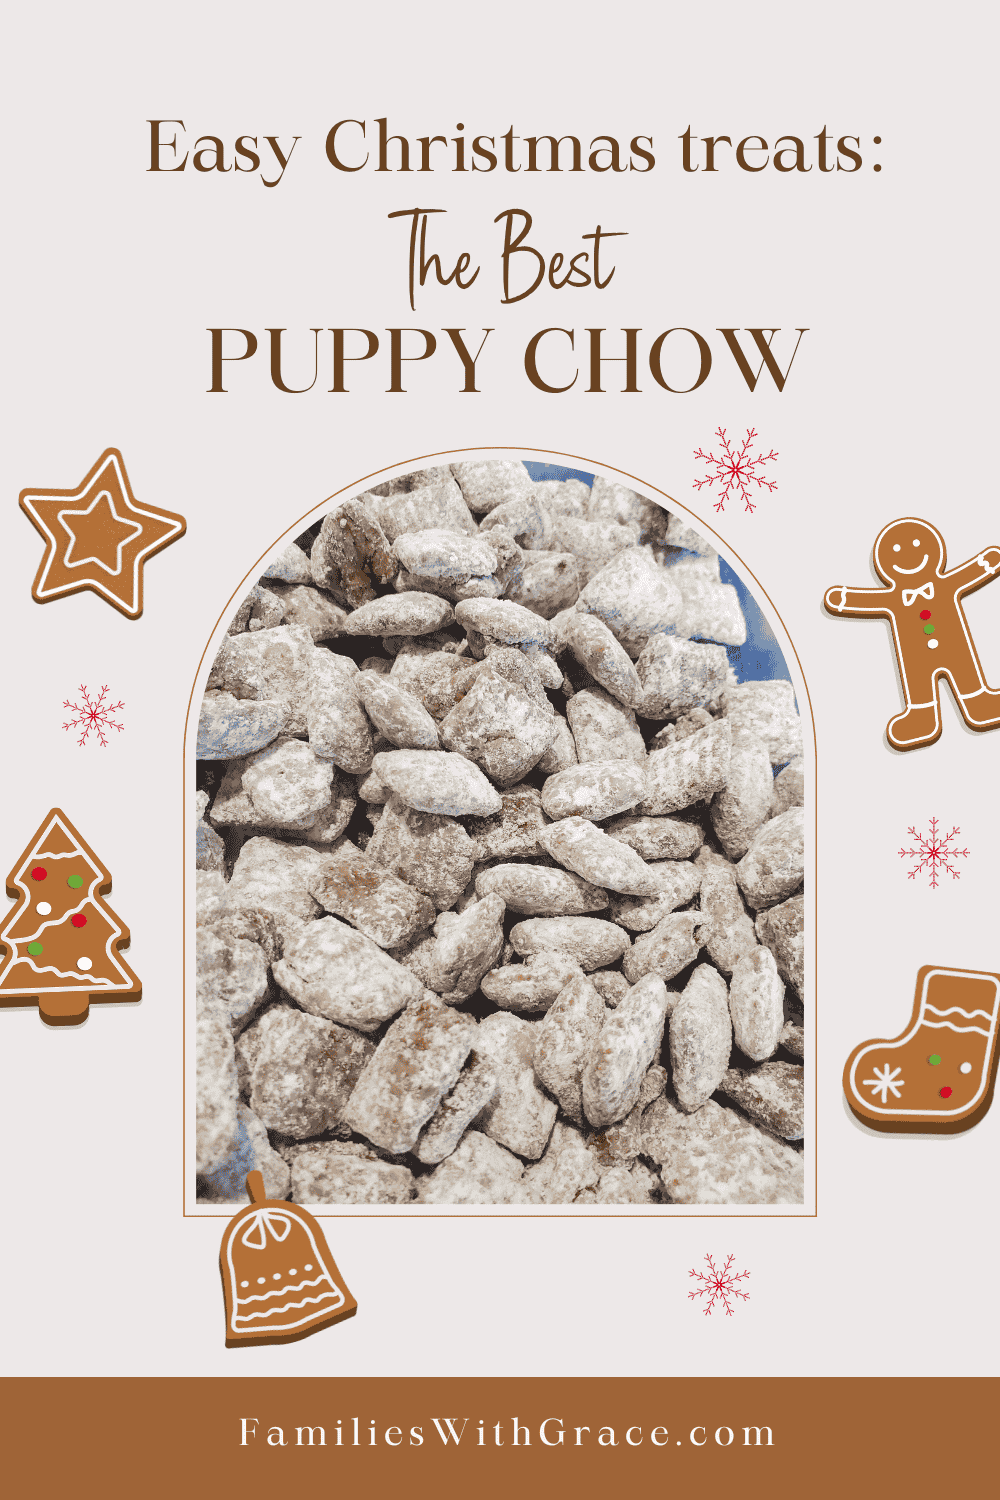 The best puppy chow recipe